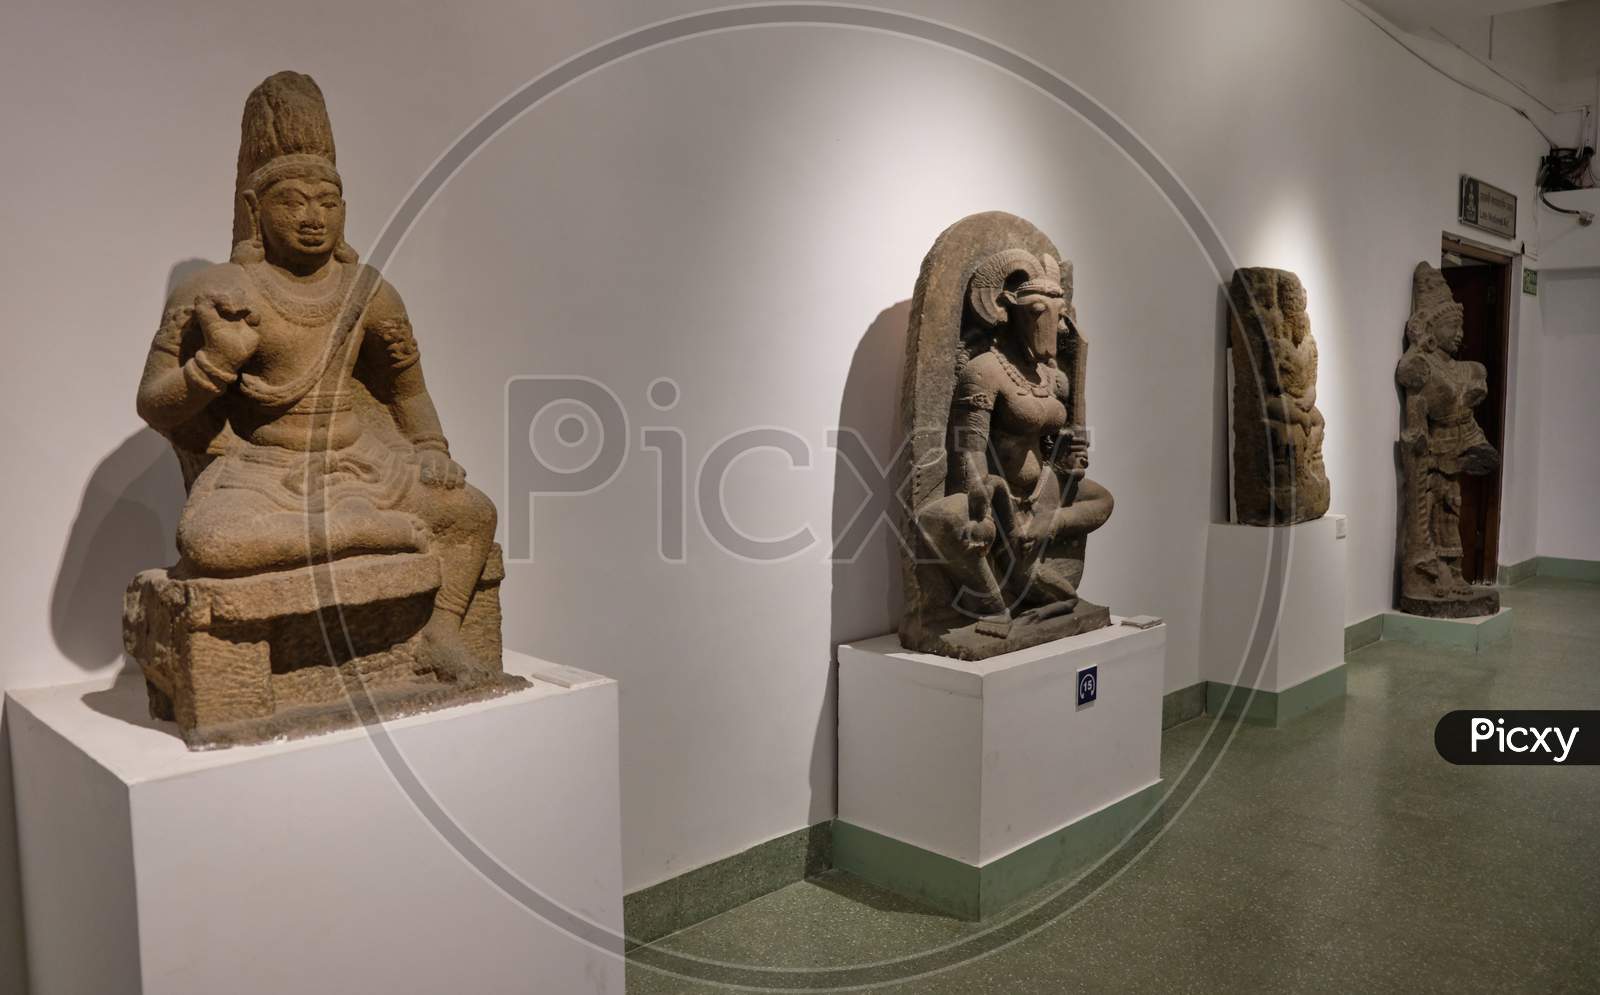 Ancient Sculptures In The National Museum Of India In New Delhi Which Houses Collection Of Artifacts Of 5,000 Years Of Indian Civilization, Culture And History